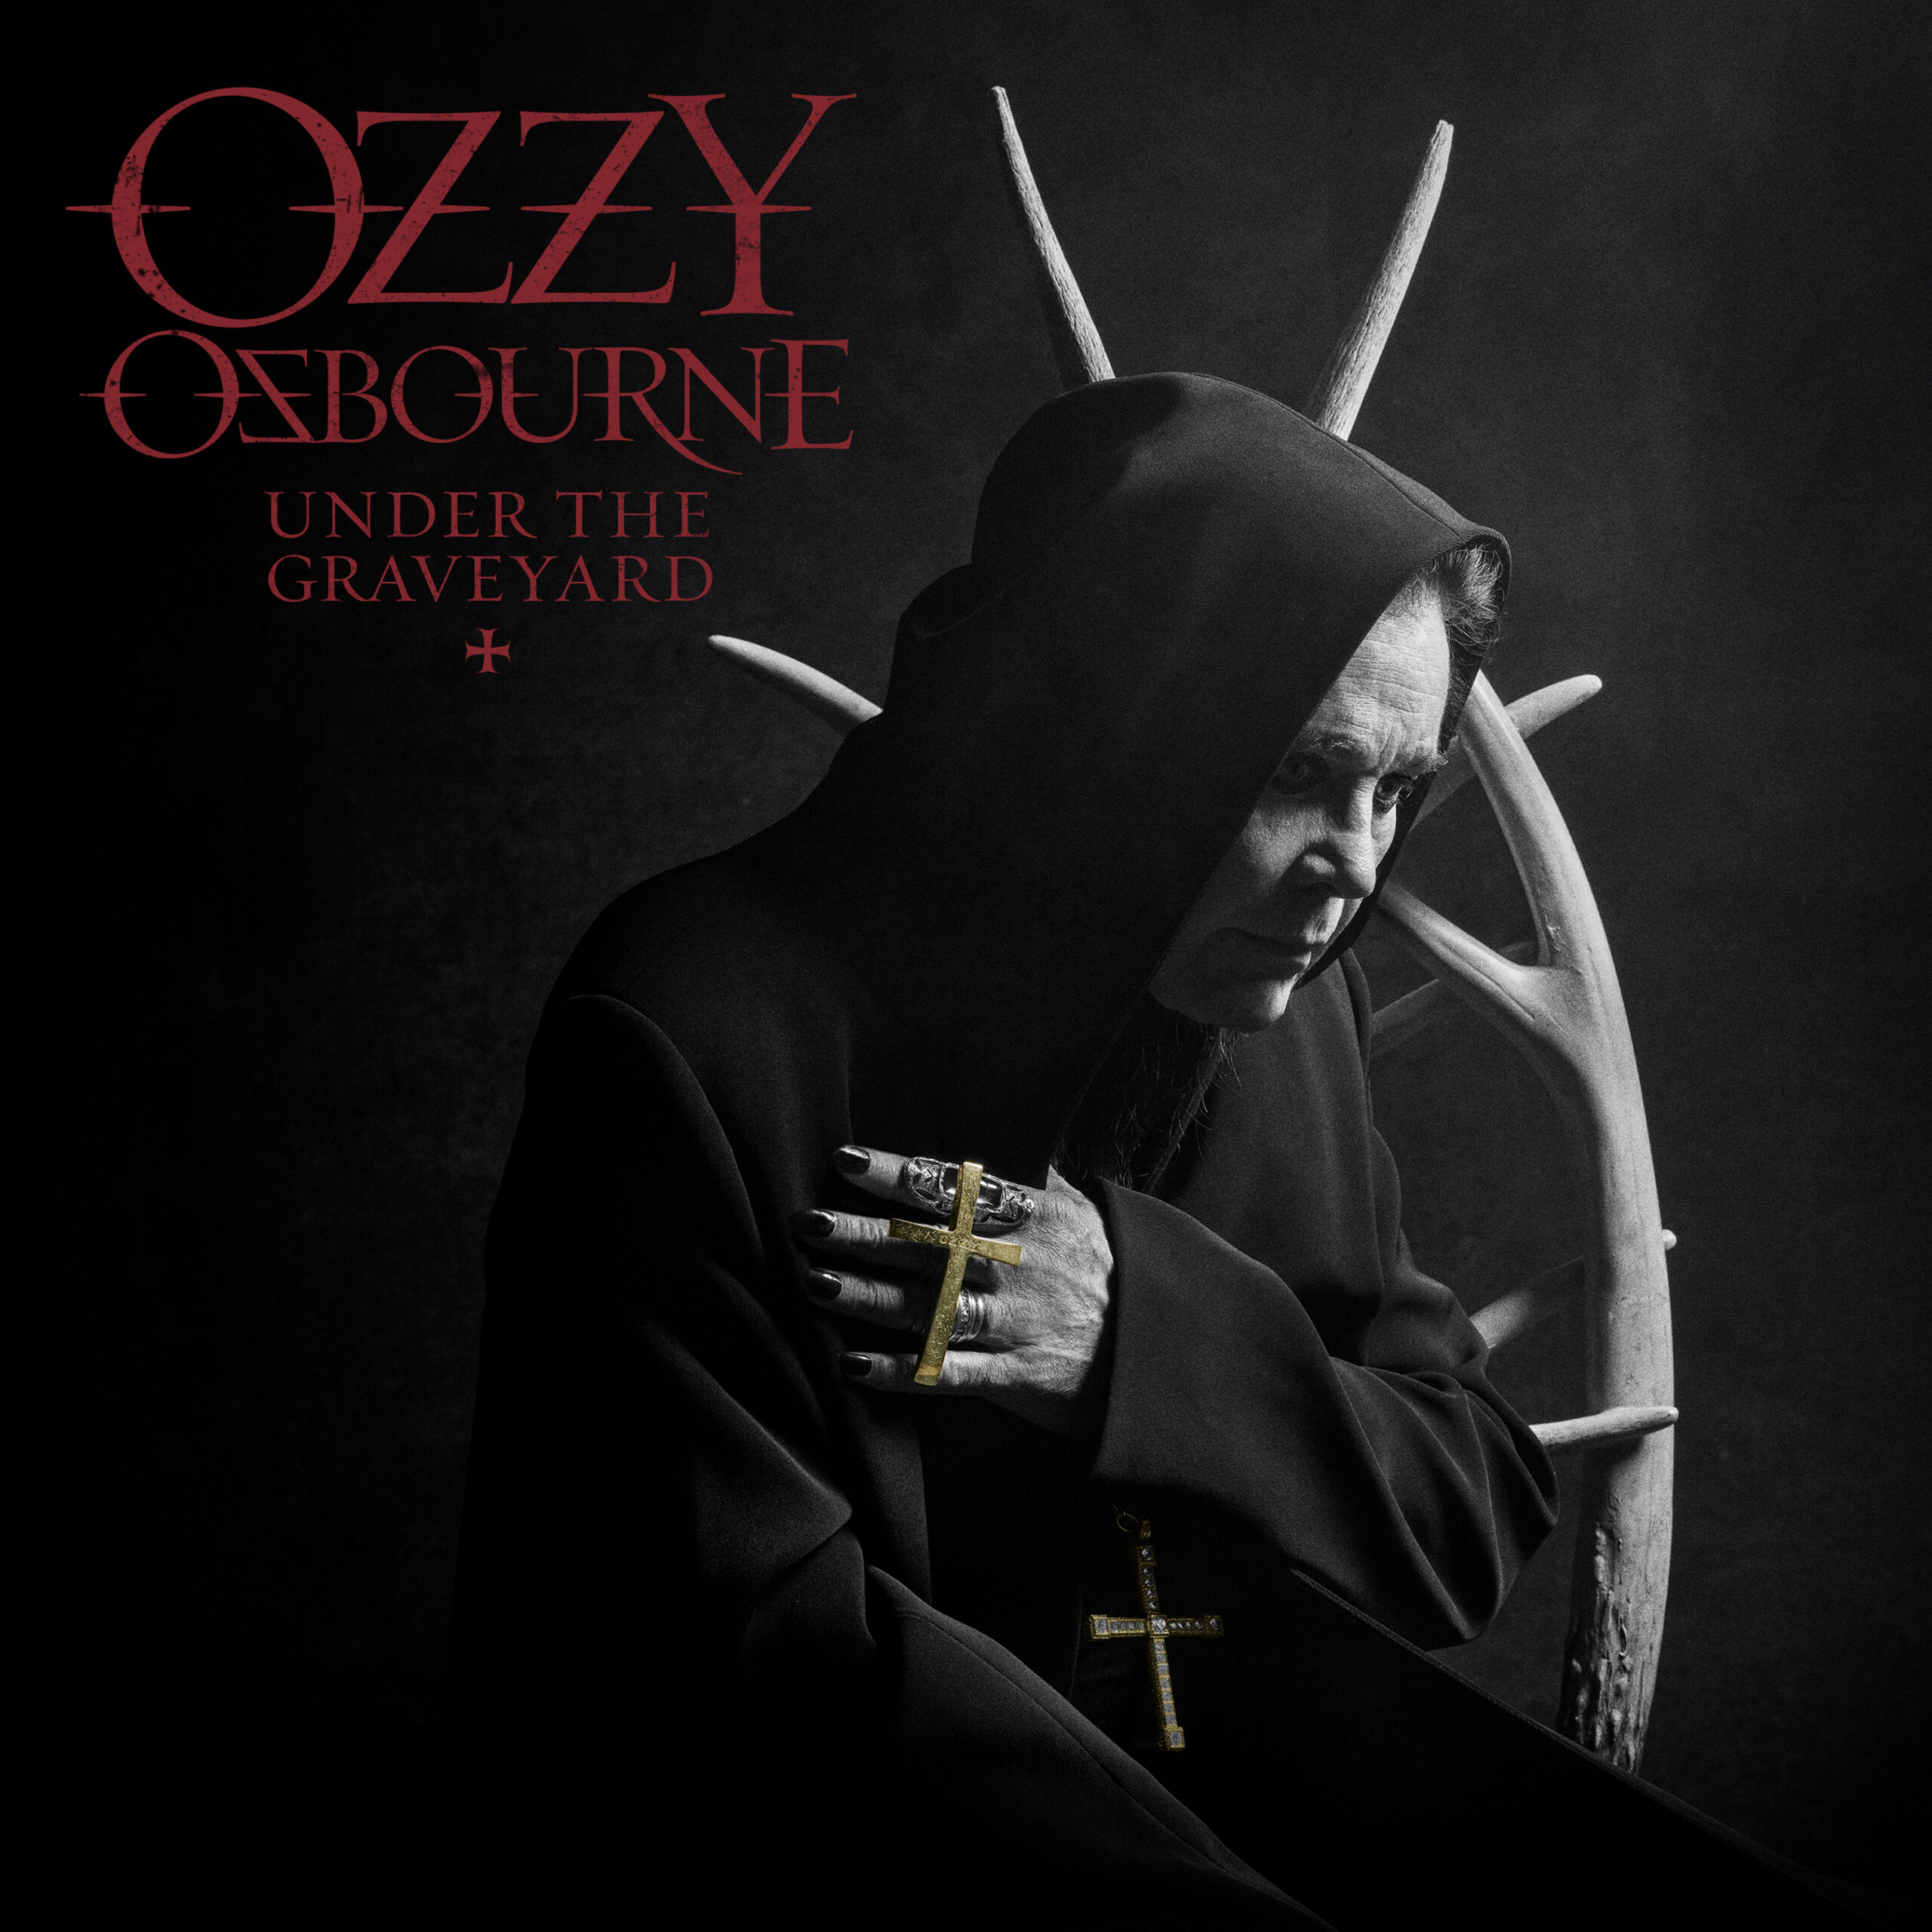 OZZY OSBOURNE TODAY RELEASES  ‘UNDER THE GRAVEYARD’ FIRST SINGLE IN NEARLY 10 YEARS